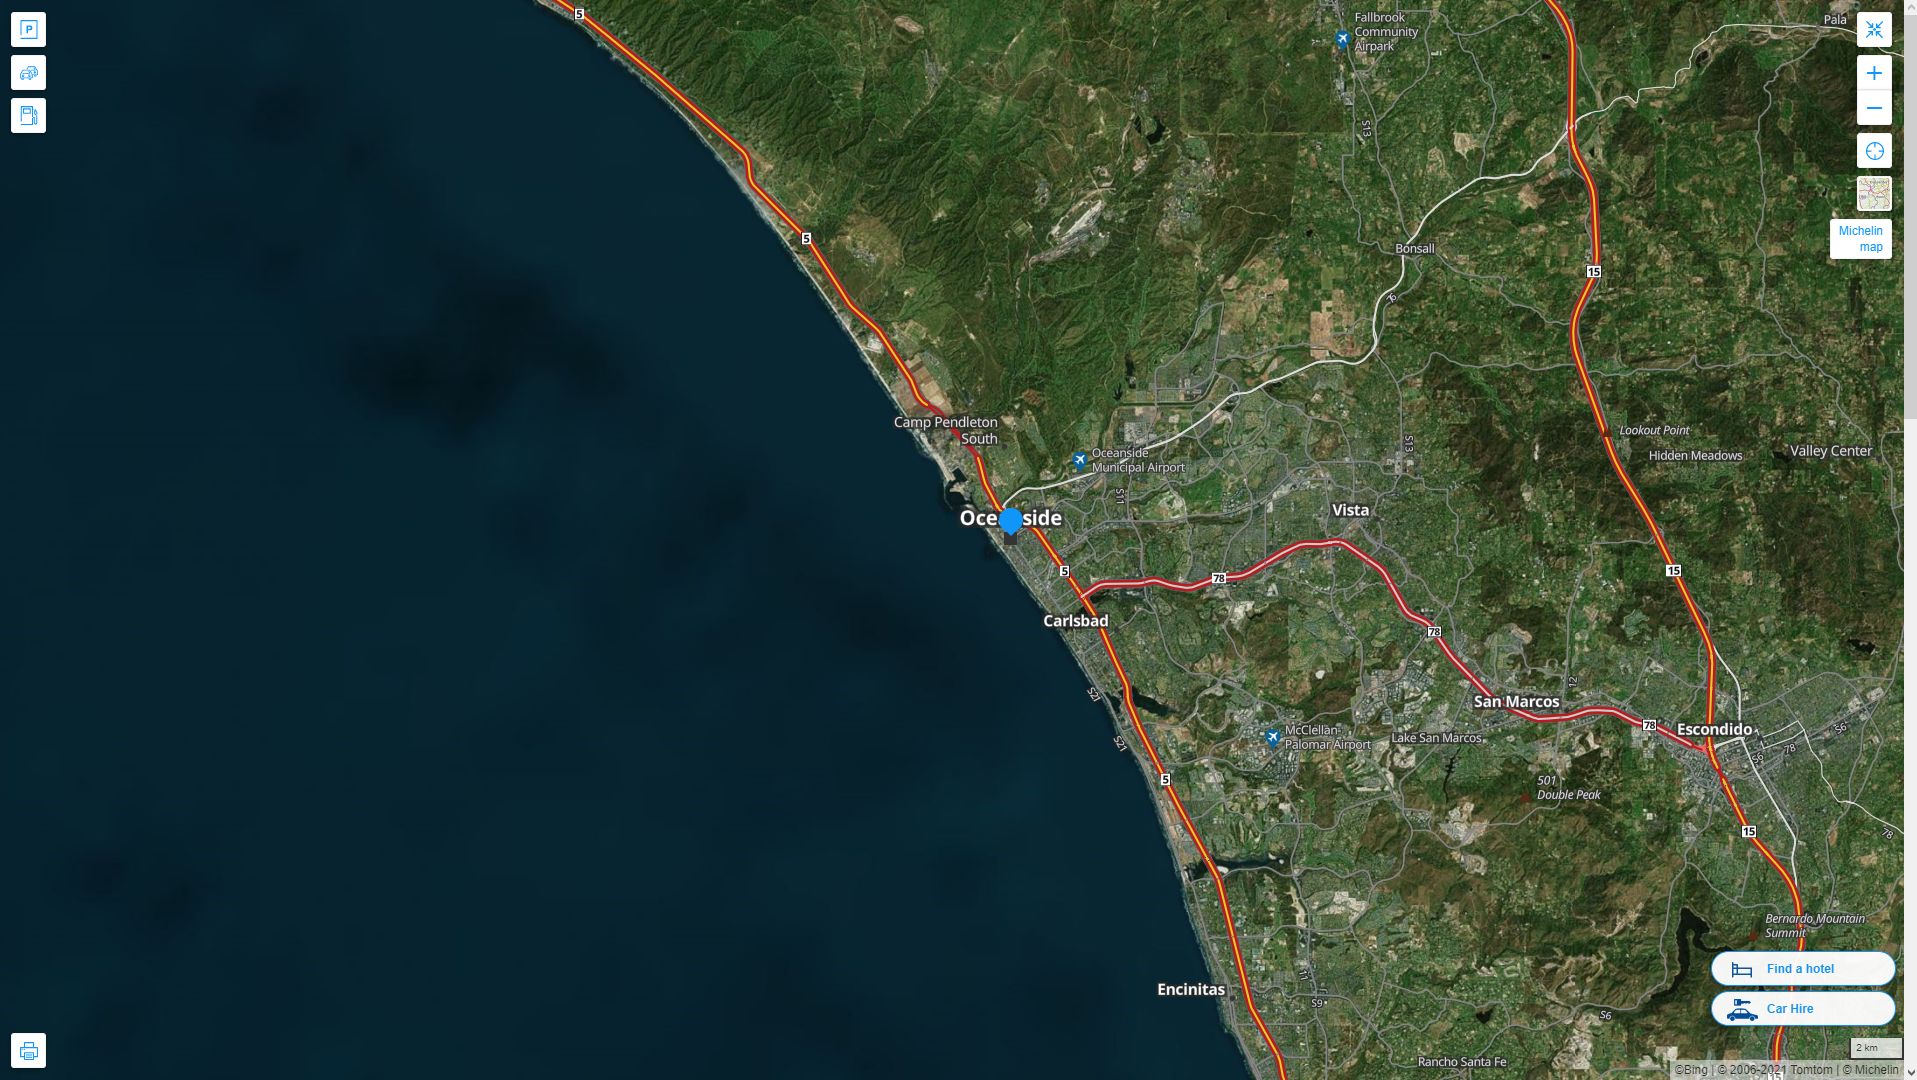 Oceanside California Highway and Road Map with Satellite View